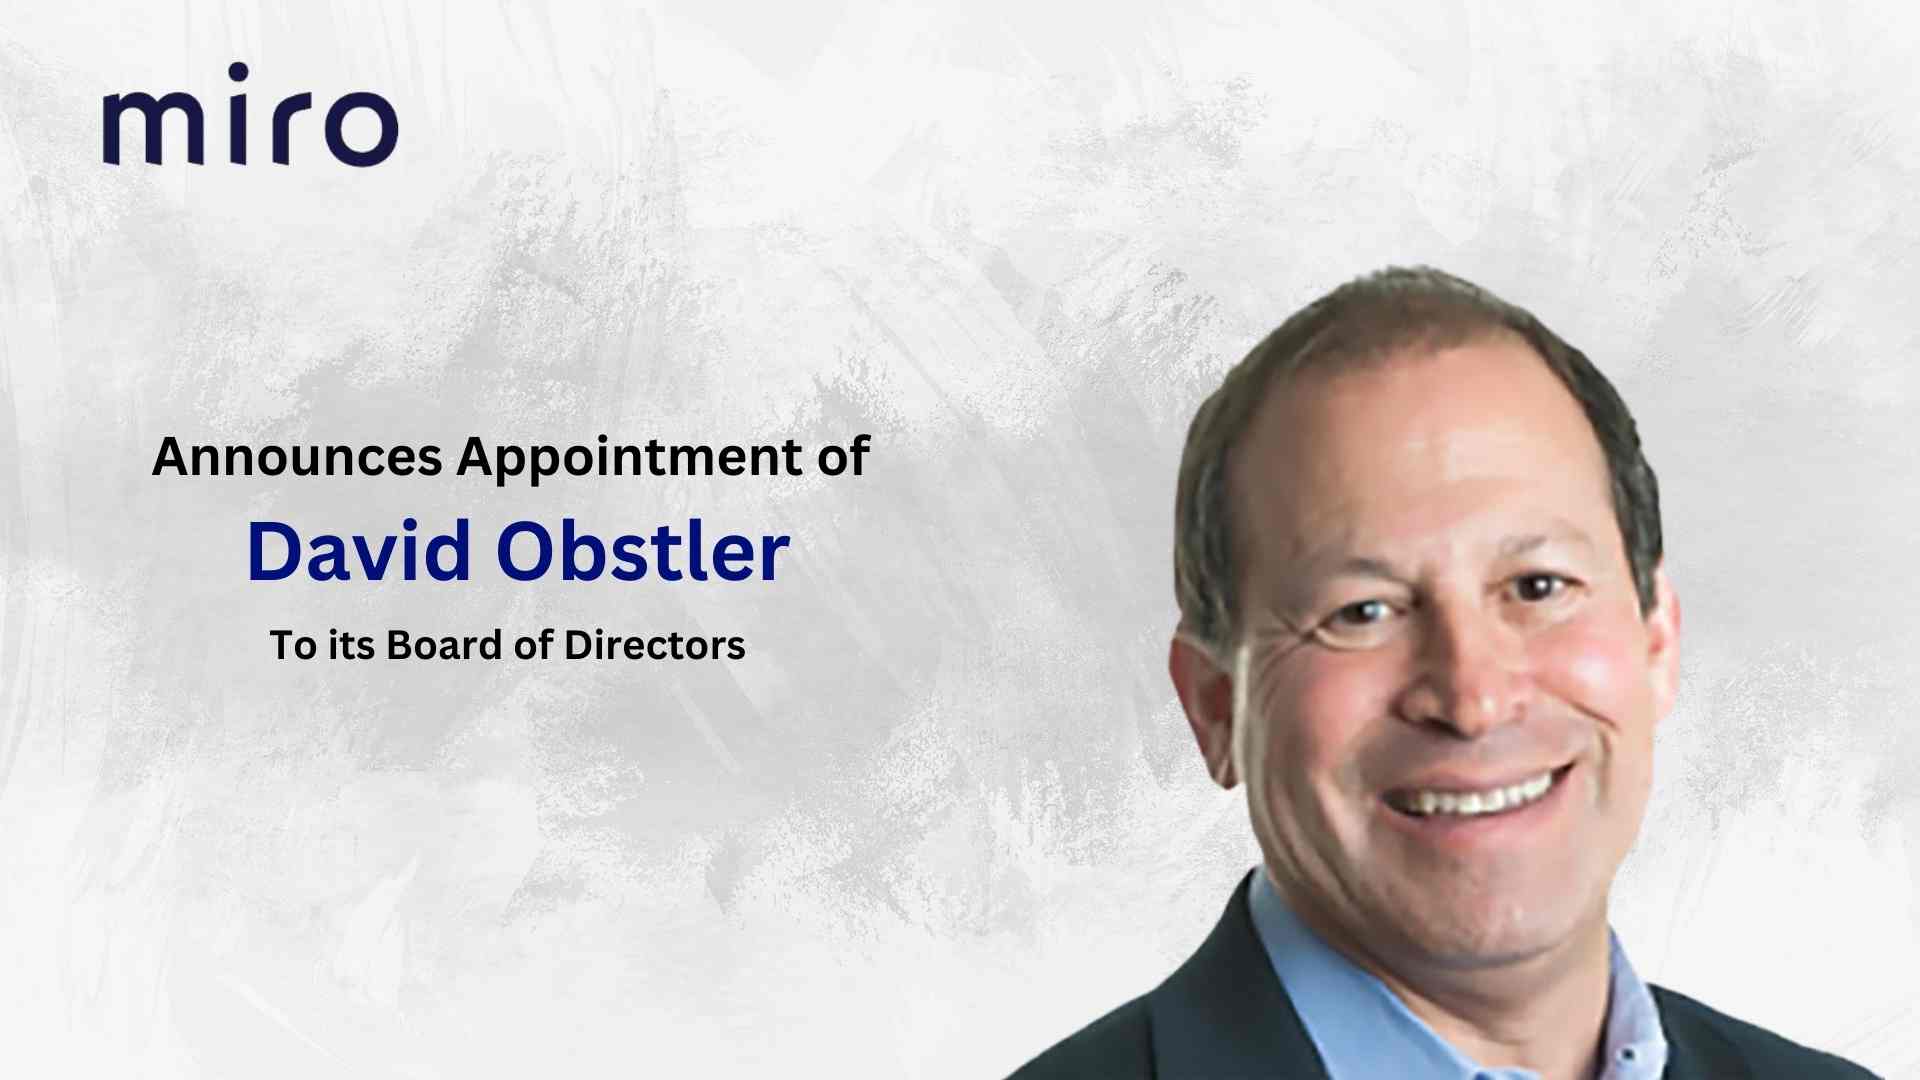 Miro Announces Appointment of David Obstler to its Board of Directors